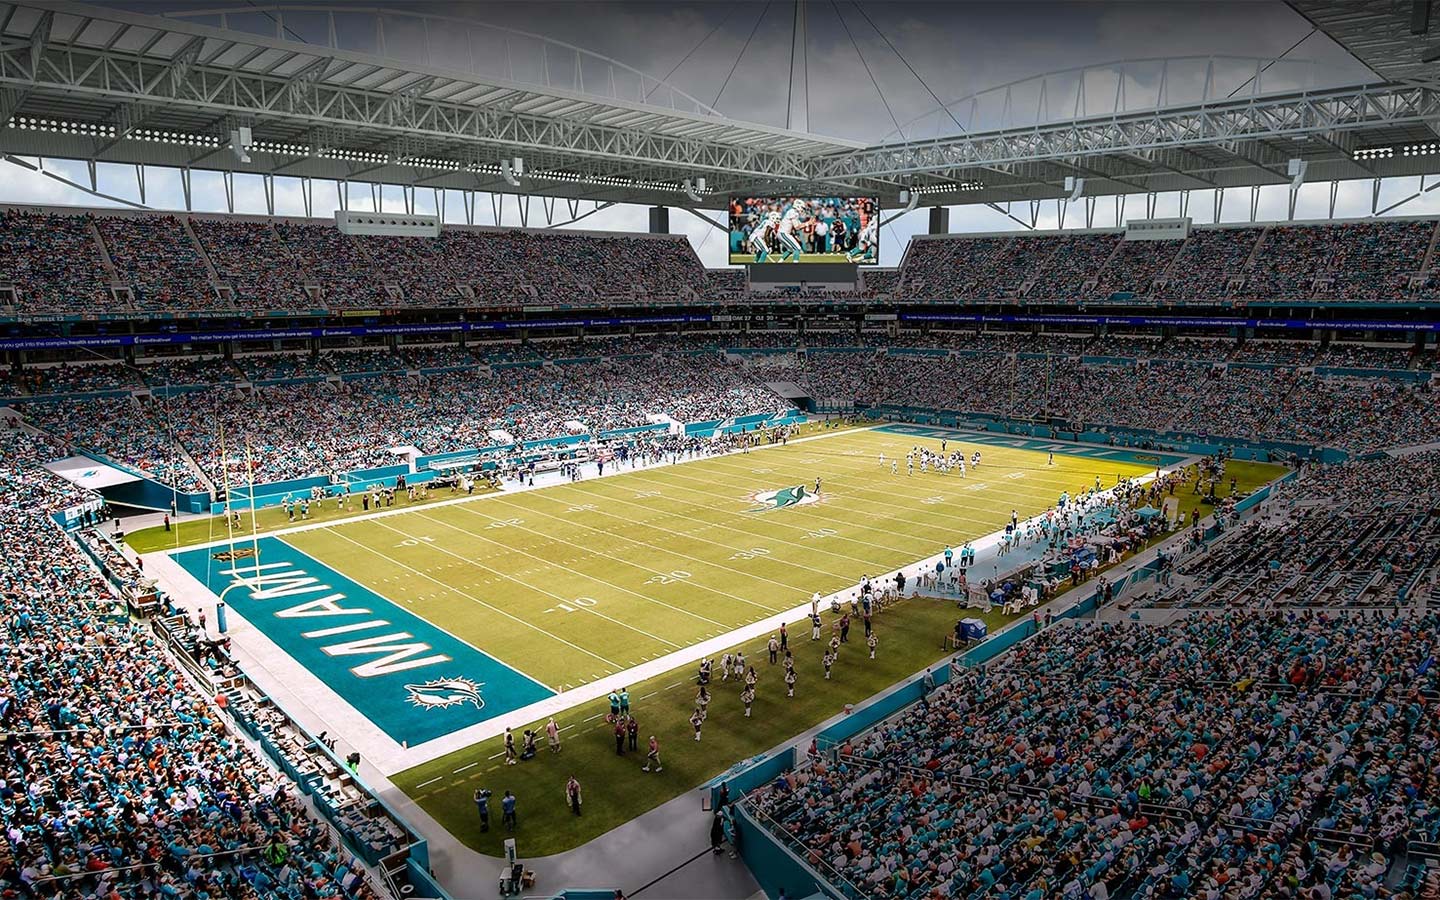 The Miami Dolphins playing in a packed stadium